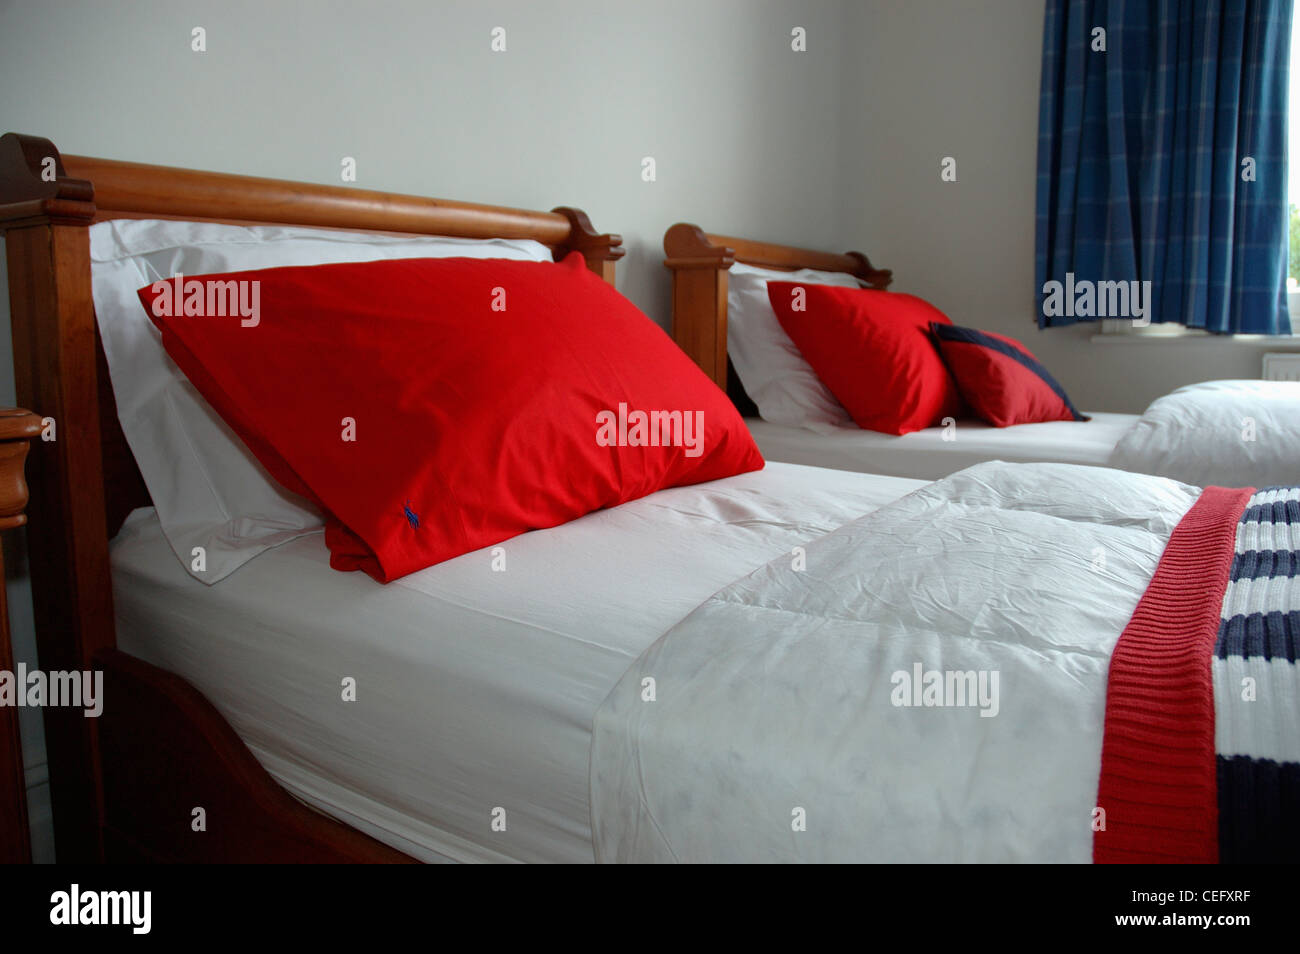 Red pillows on twin beds with white quilts in townhouse bedroom Stock Photo